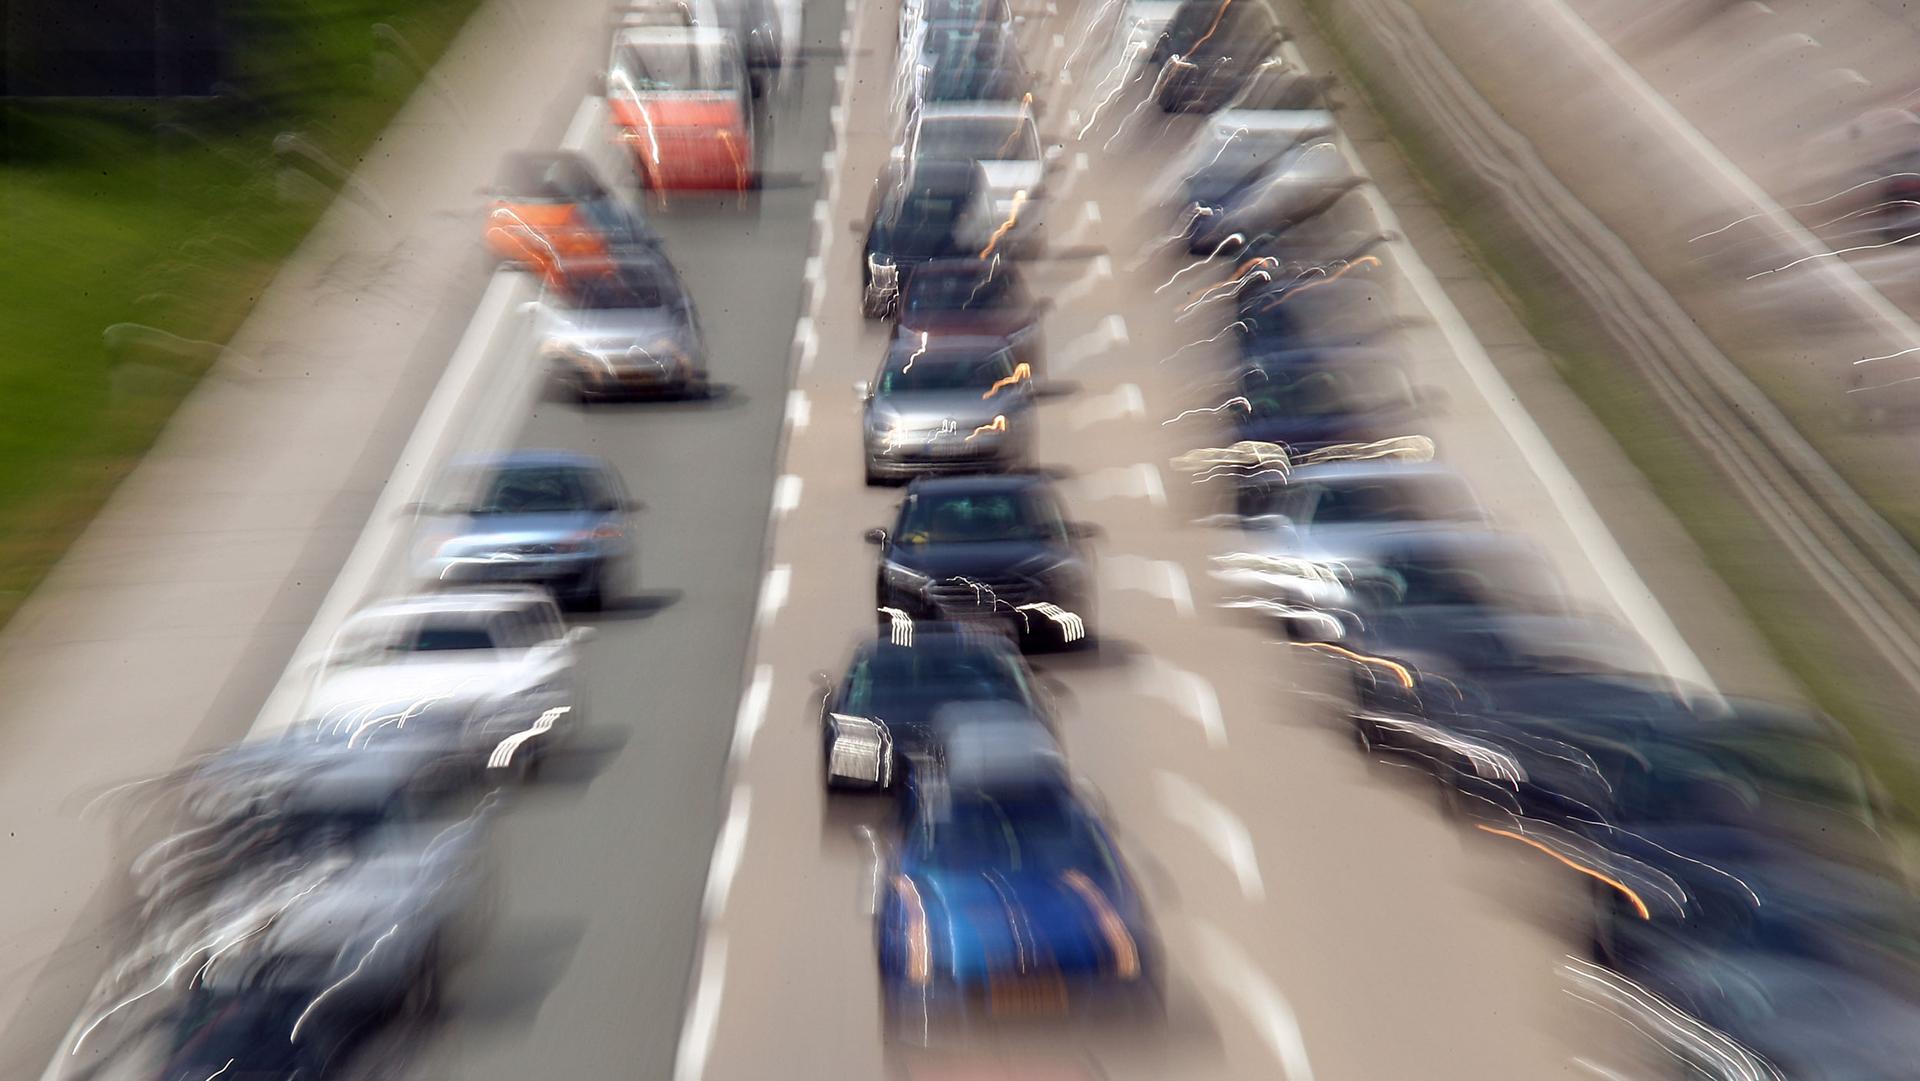 A three lane highway is shown packed with cars and taken with a blurry effect.